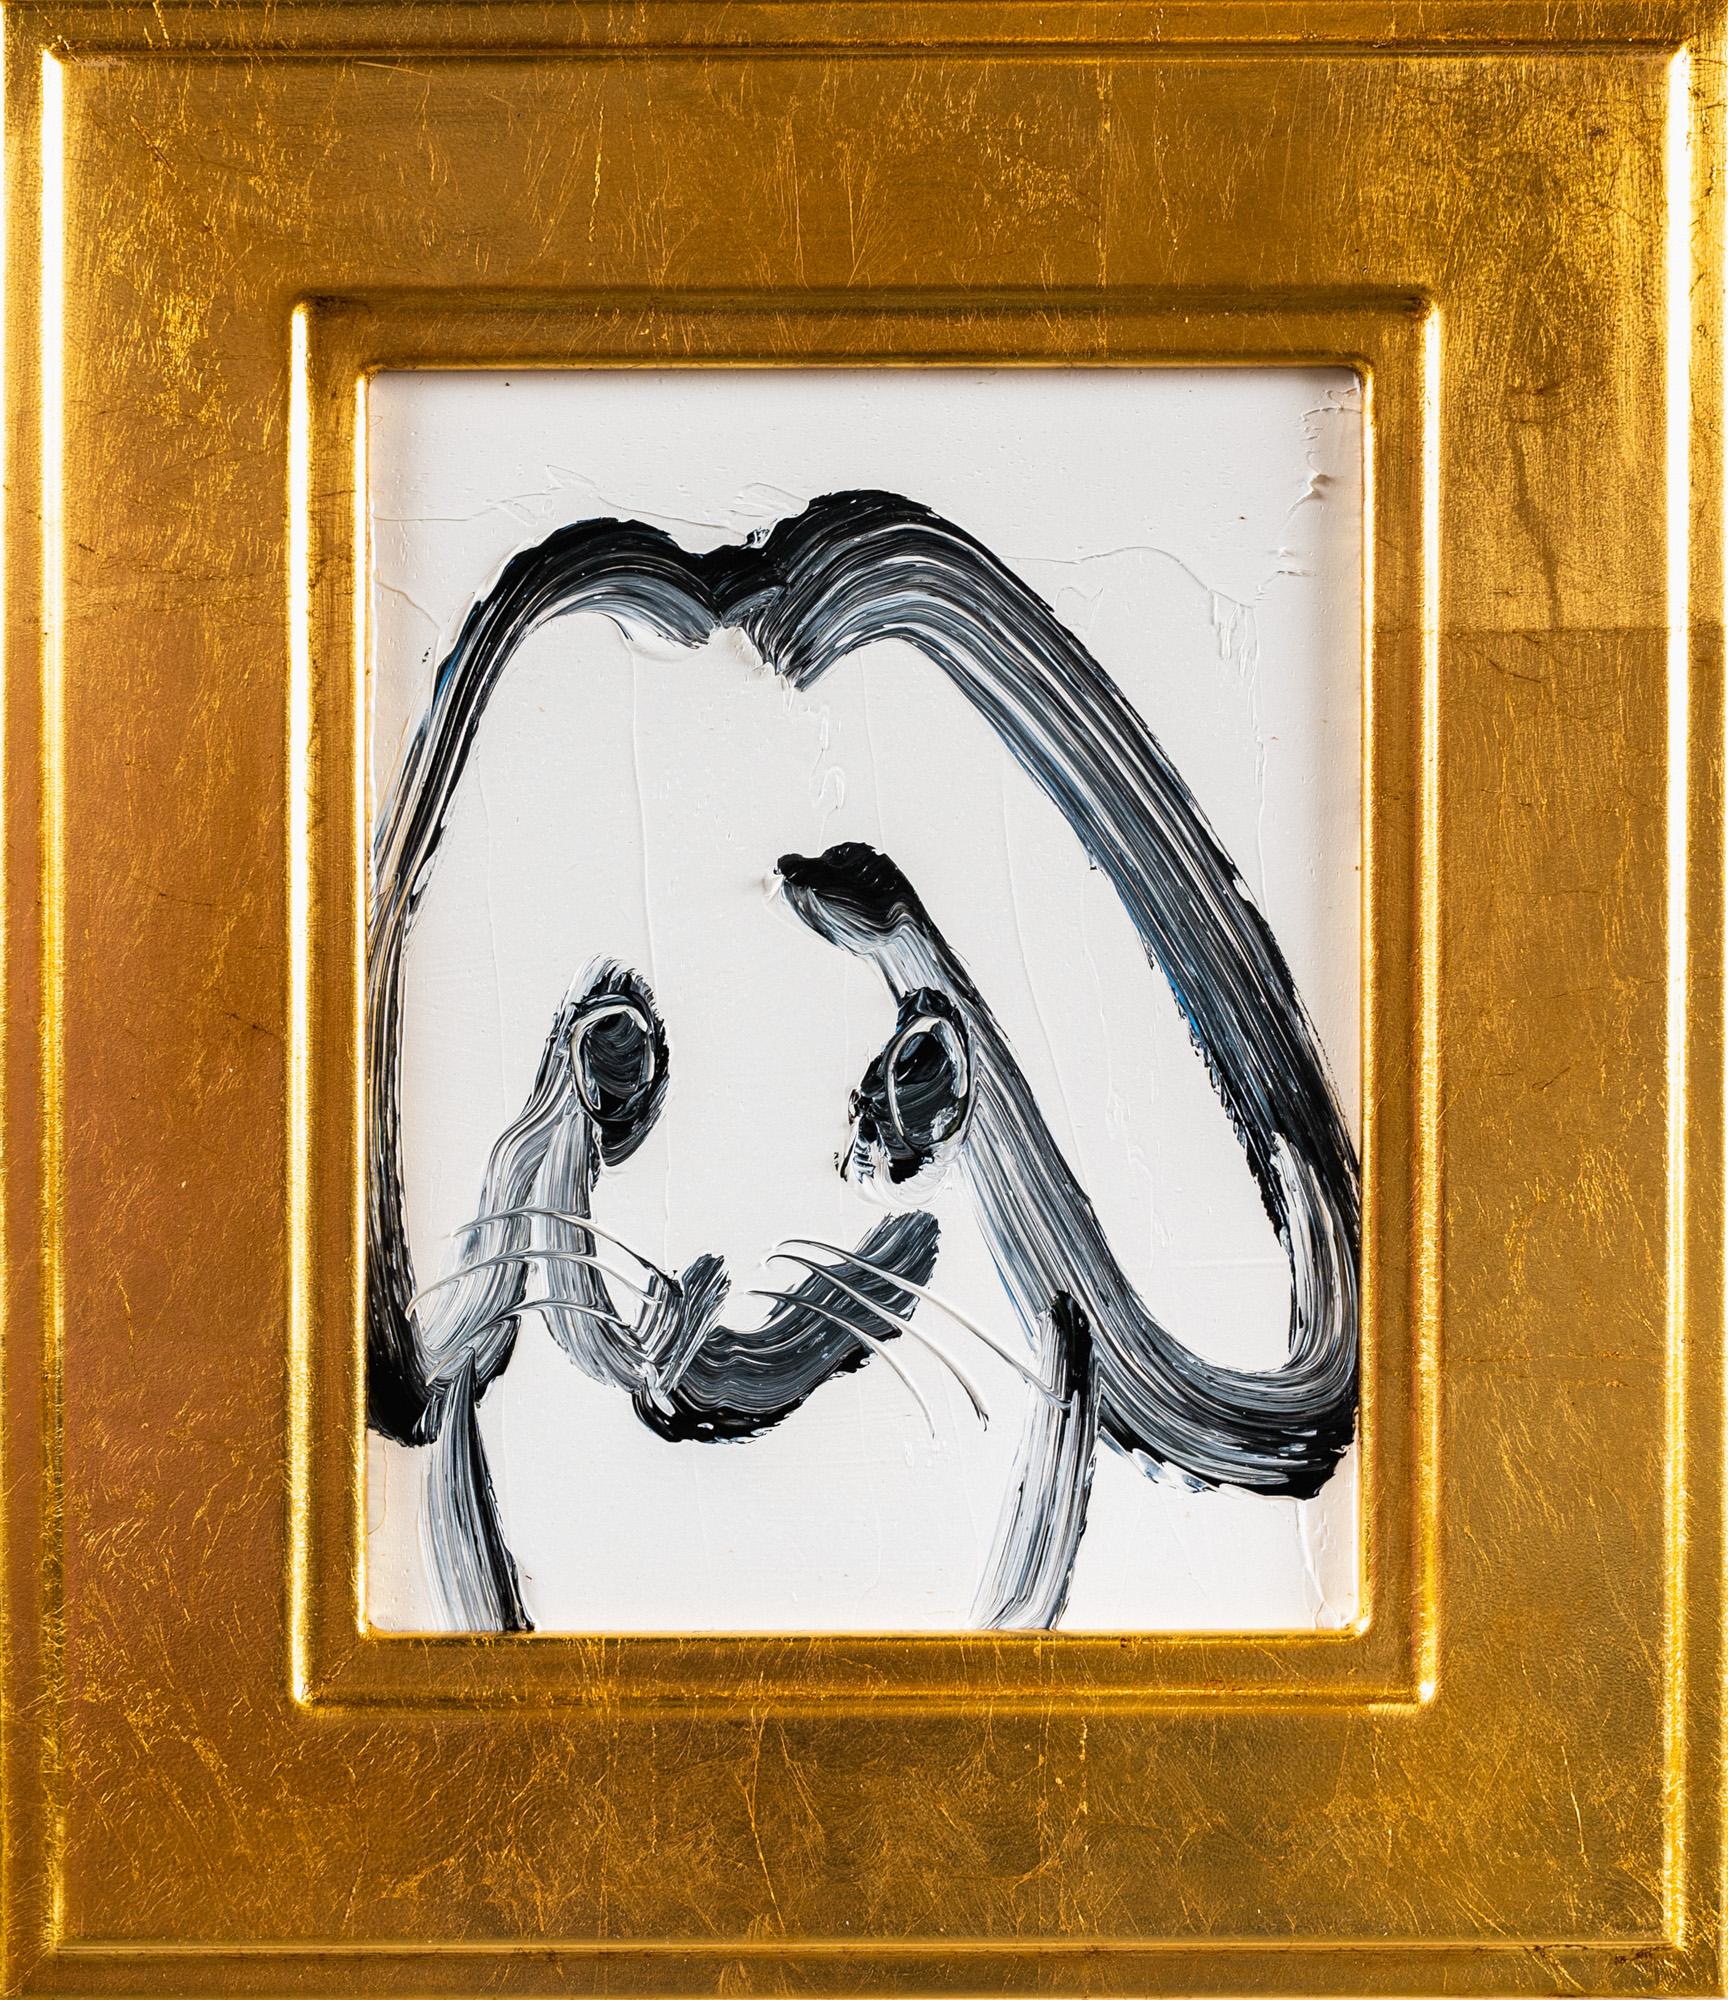 "Lop Ear" Neo-Expressionist Monochromatic Bunny Framed Oil on Wood Painting